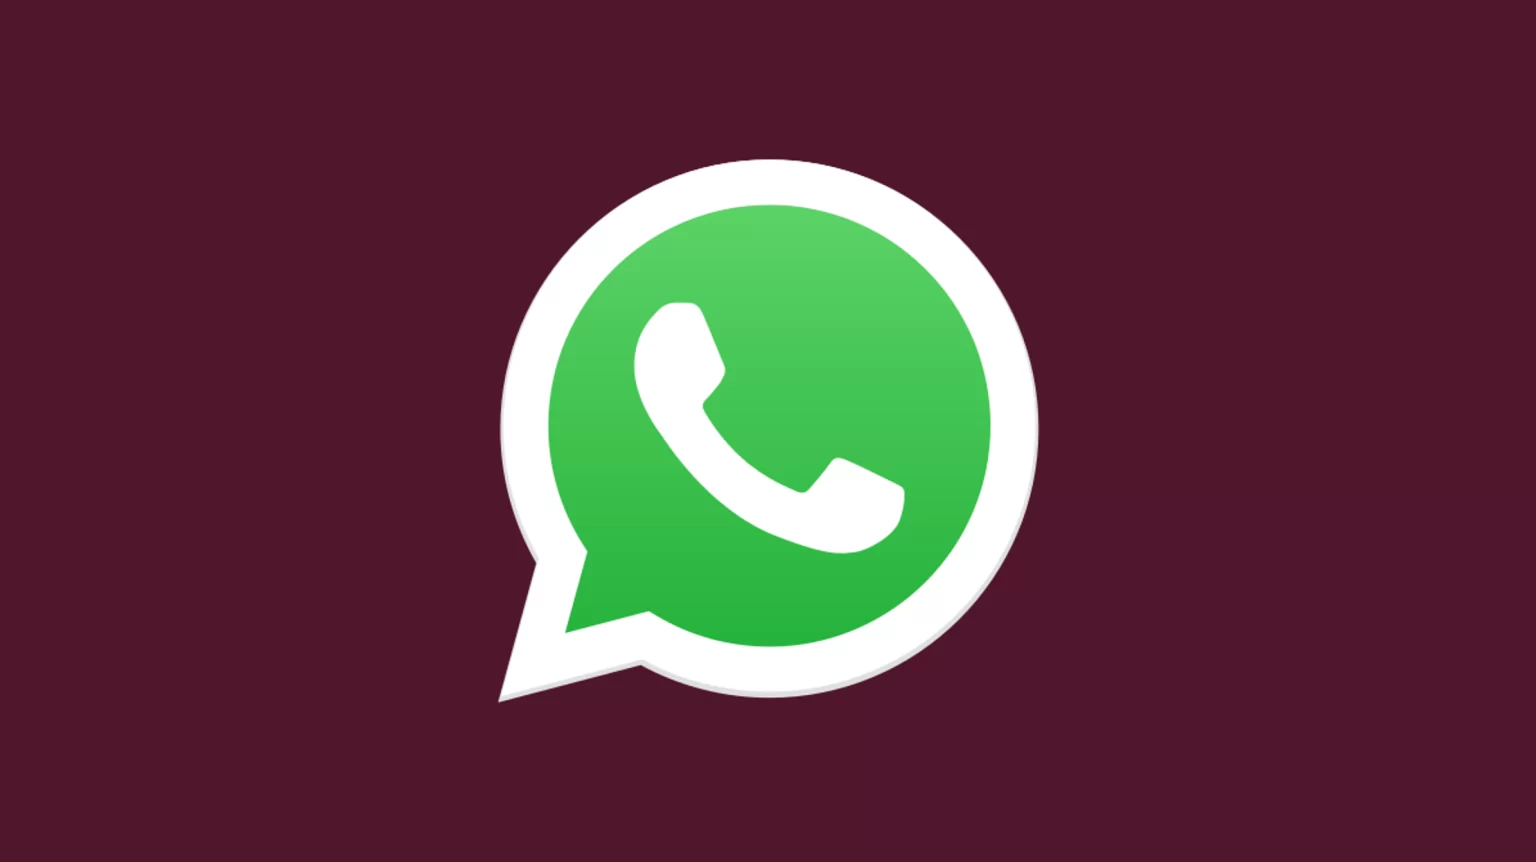 whatsapp hero 1536x862 - WhatsApp may soon let users put voice notes as status updates